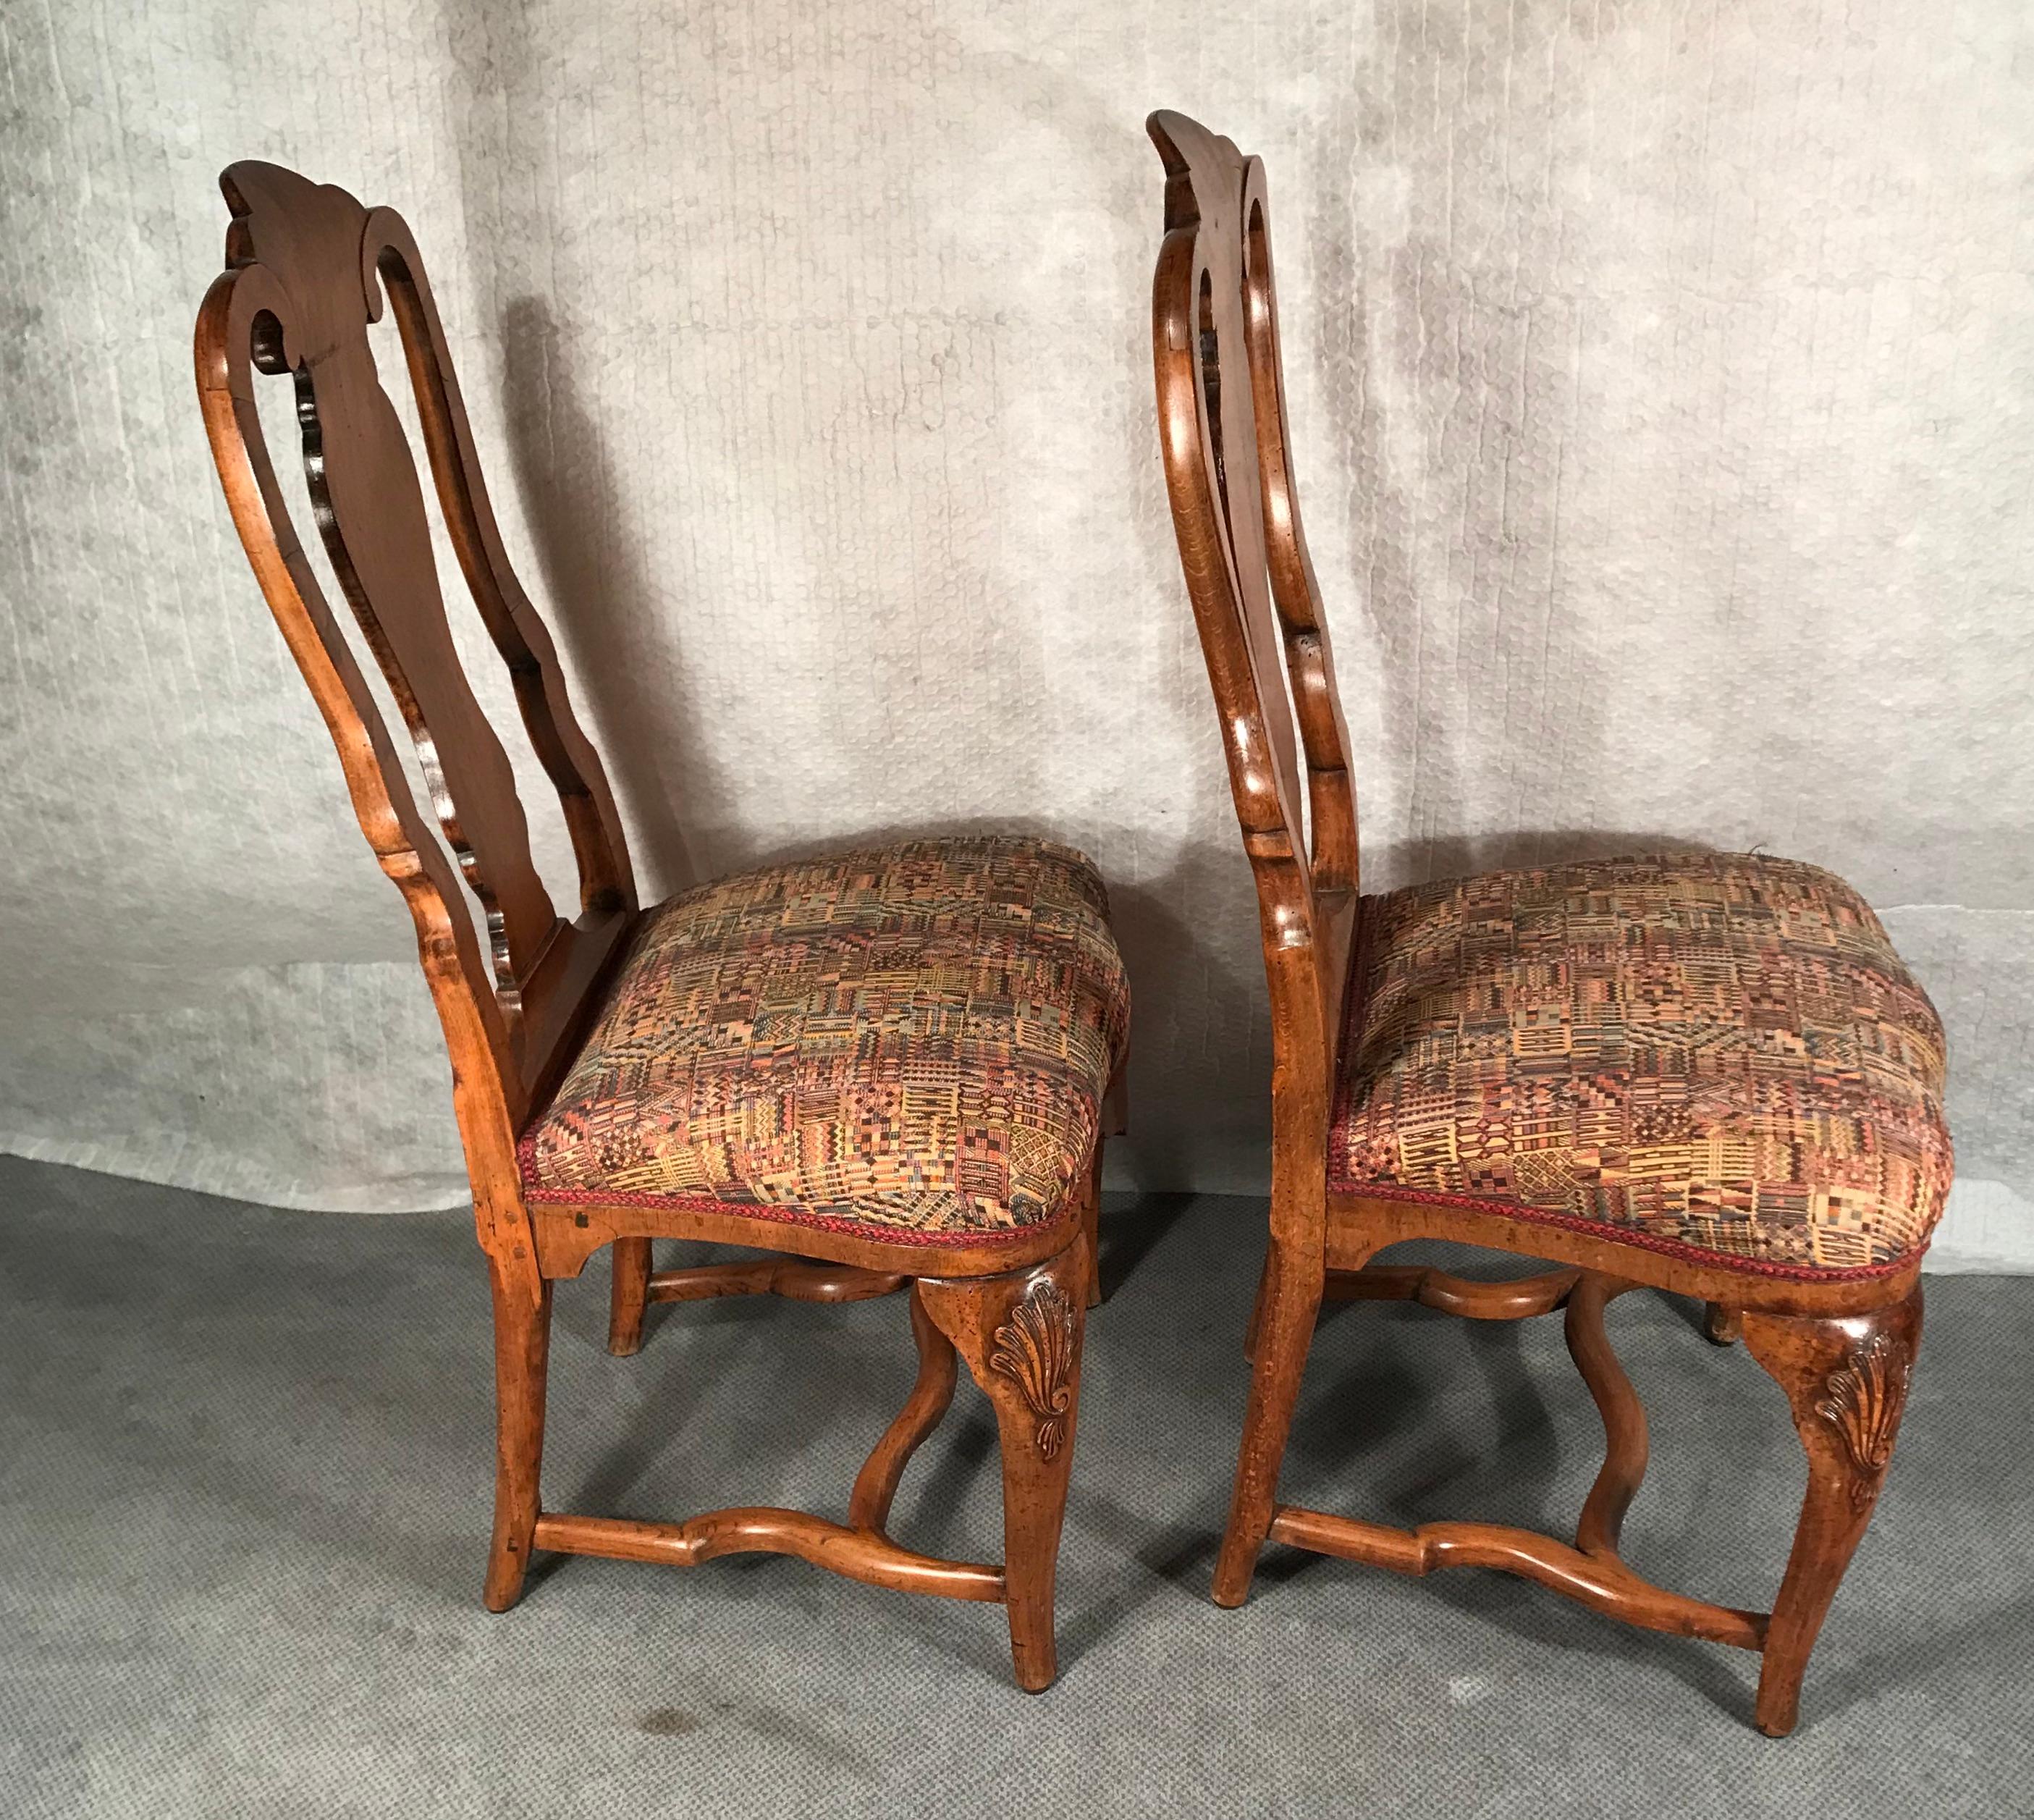 A set of two original Baroque chairs, South German, 18th century.
This unique set of Baroque chairs is made of walnut. The chairs have beautifully carvings on their front legs. They are in good original condition.
They ship from Germany and